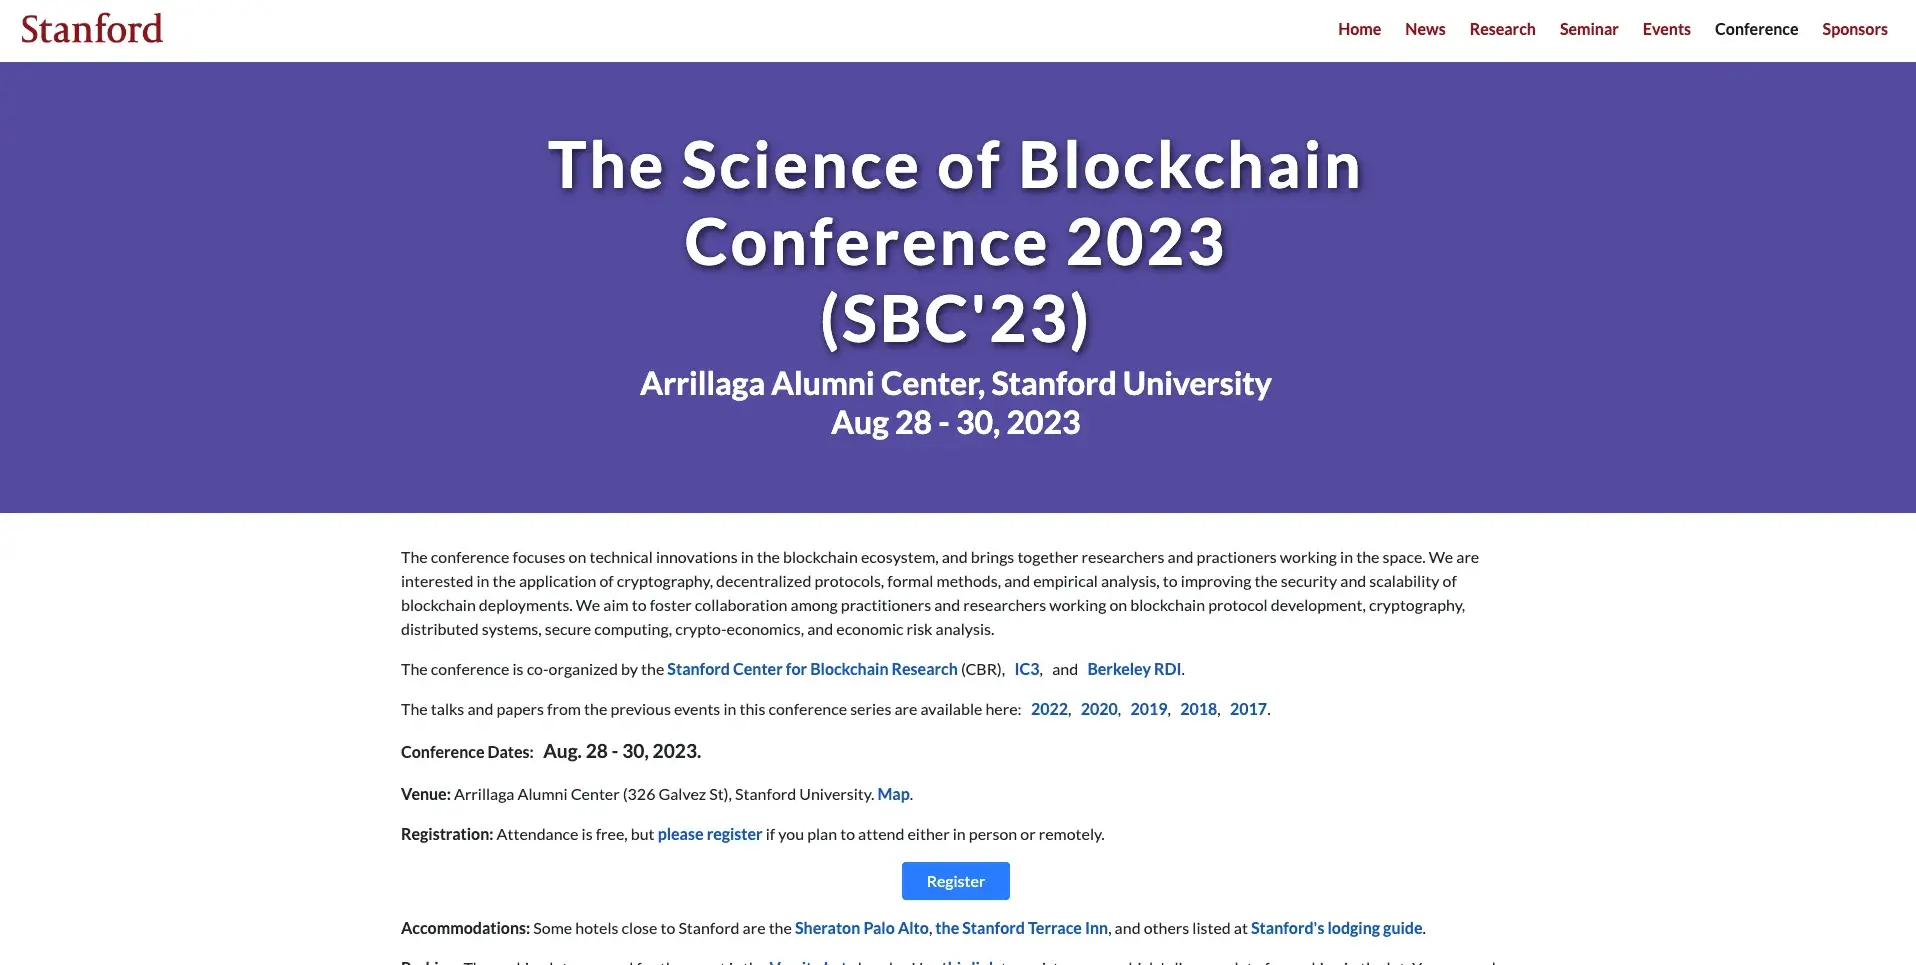 5. The Science of Blockchain Conference